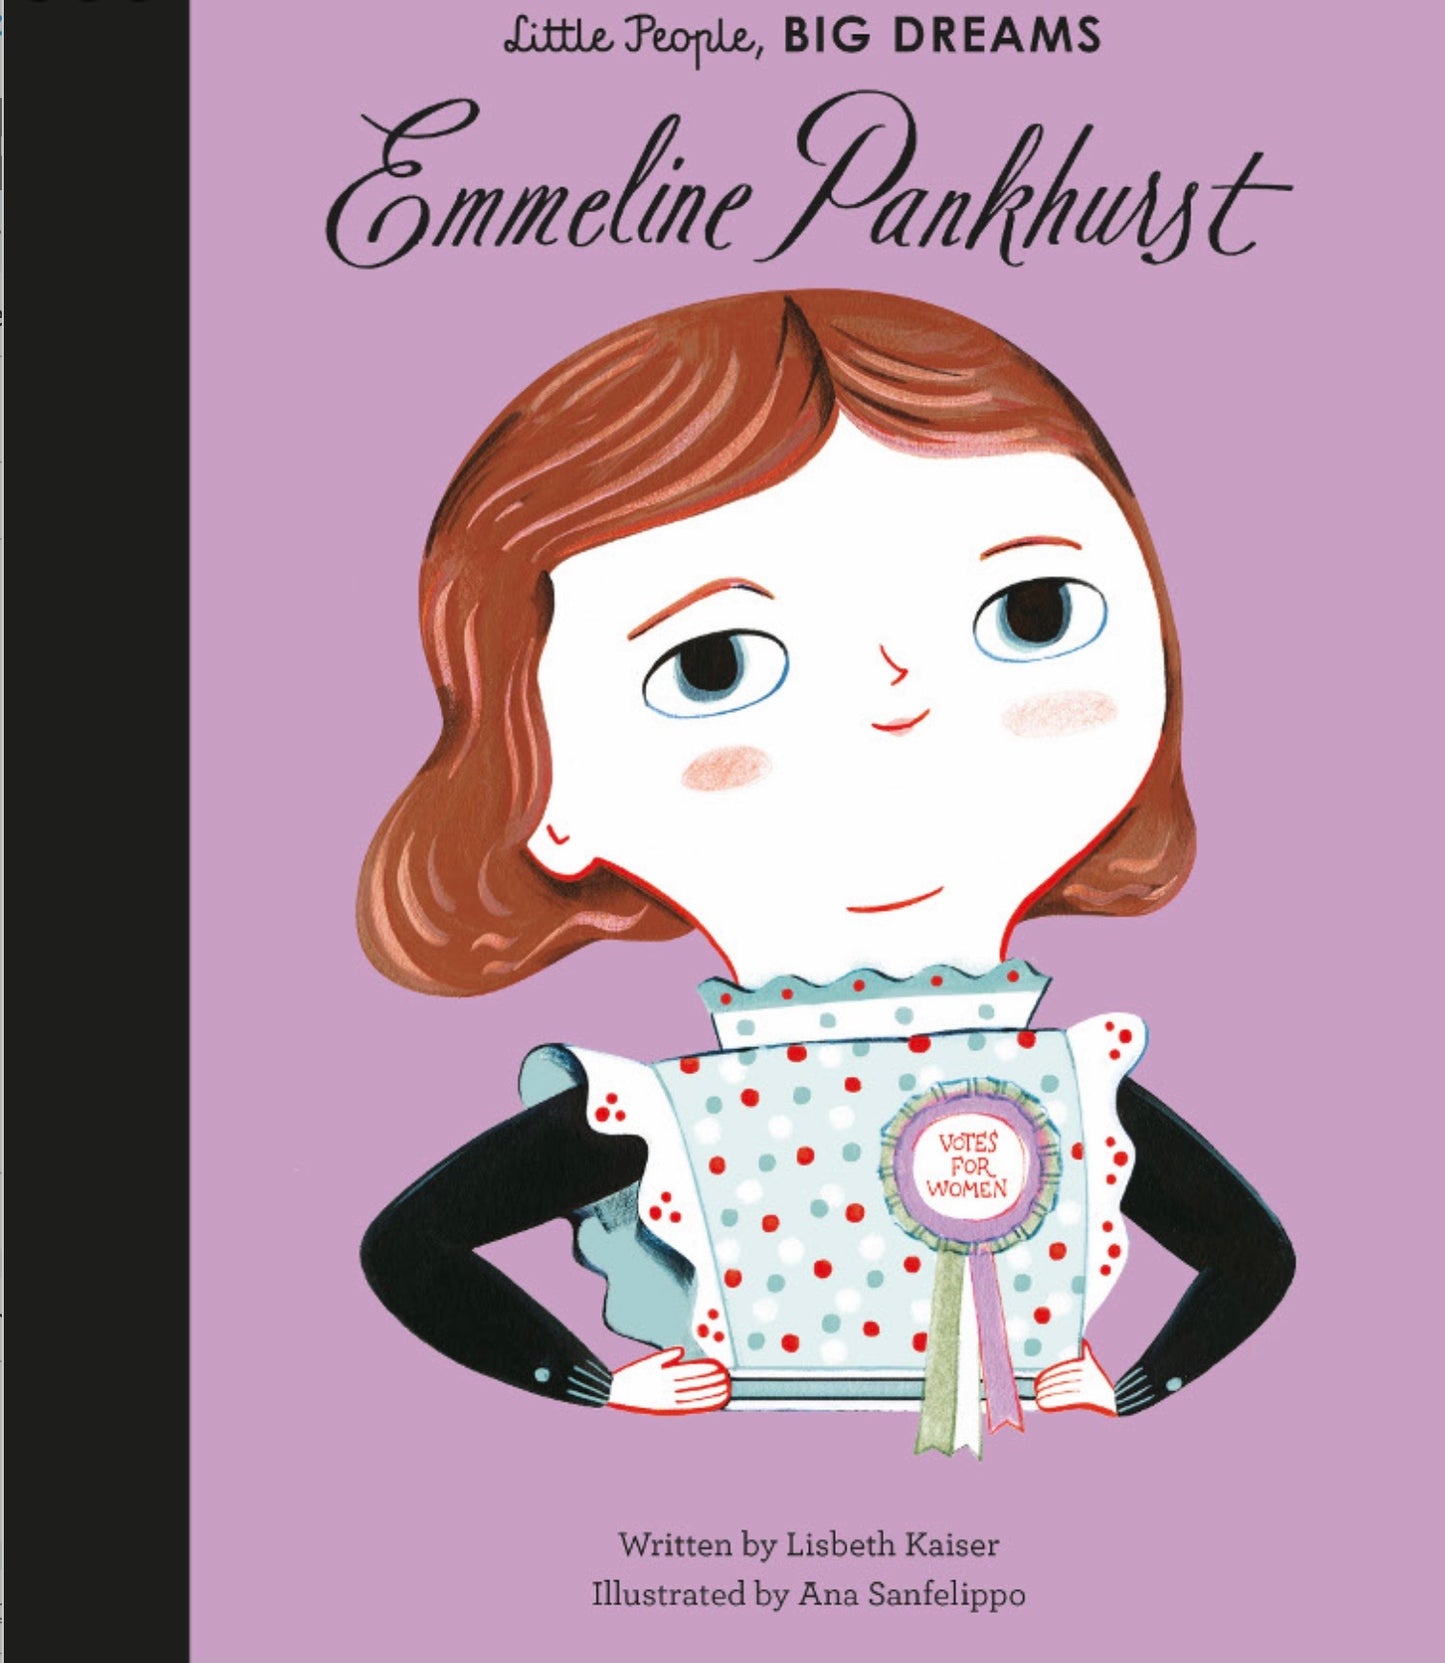 Little People Big Dreams, Emmeline Pankhurst, Books about inspirational people, Children’s books, birthday gift, Little People Big Dreams Stockist, midlands kids shop, independent kids brand, sustainable children’s toys 